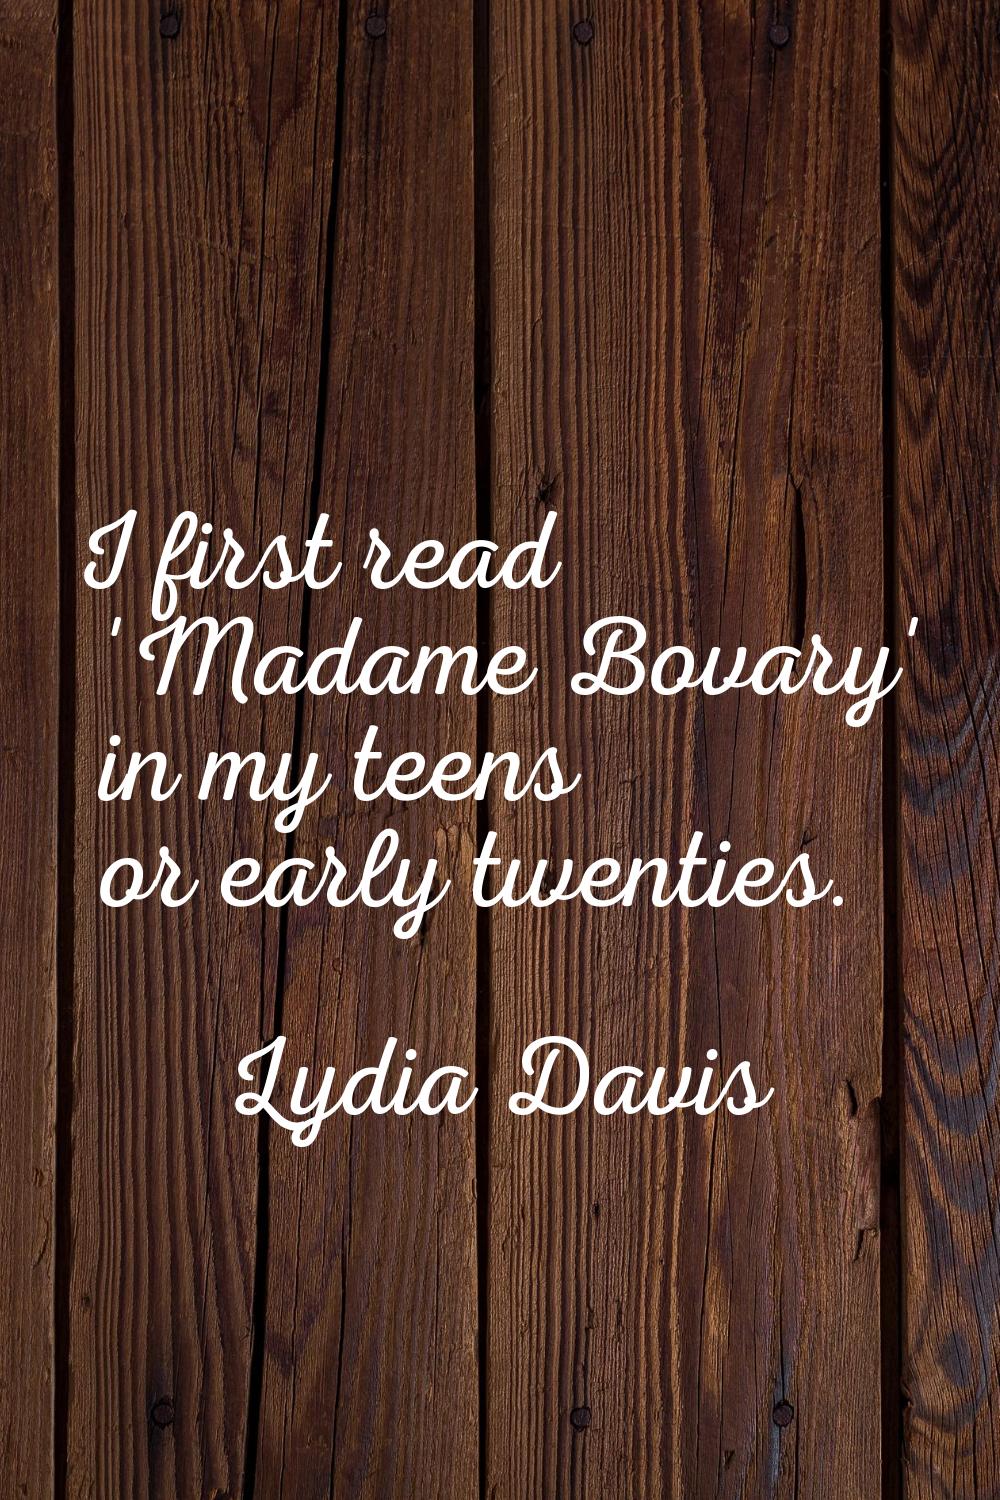 I first read 'Madame Bovary' in my teens or early twenties.